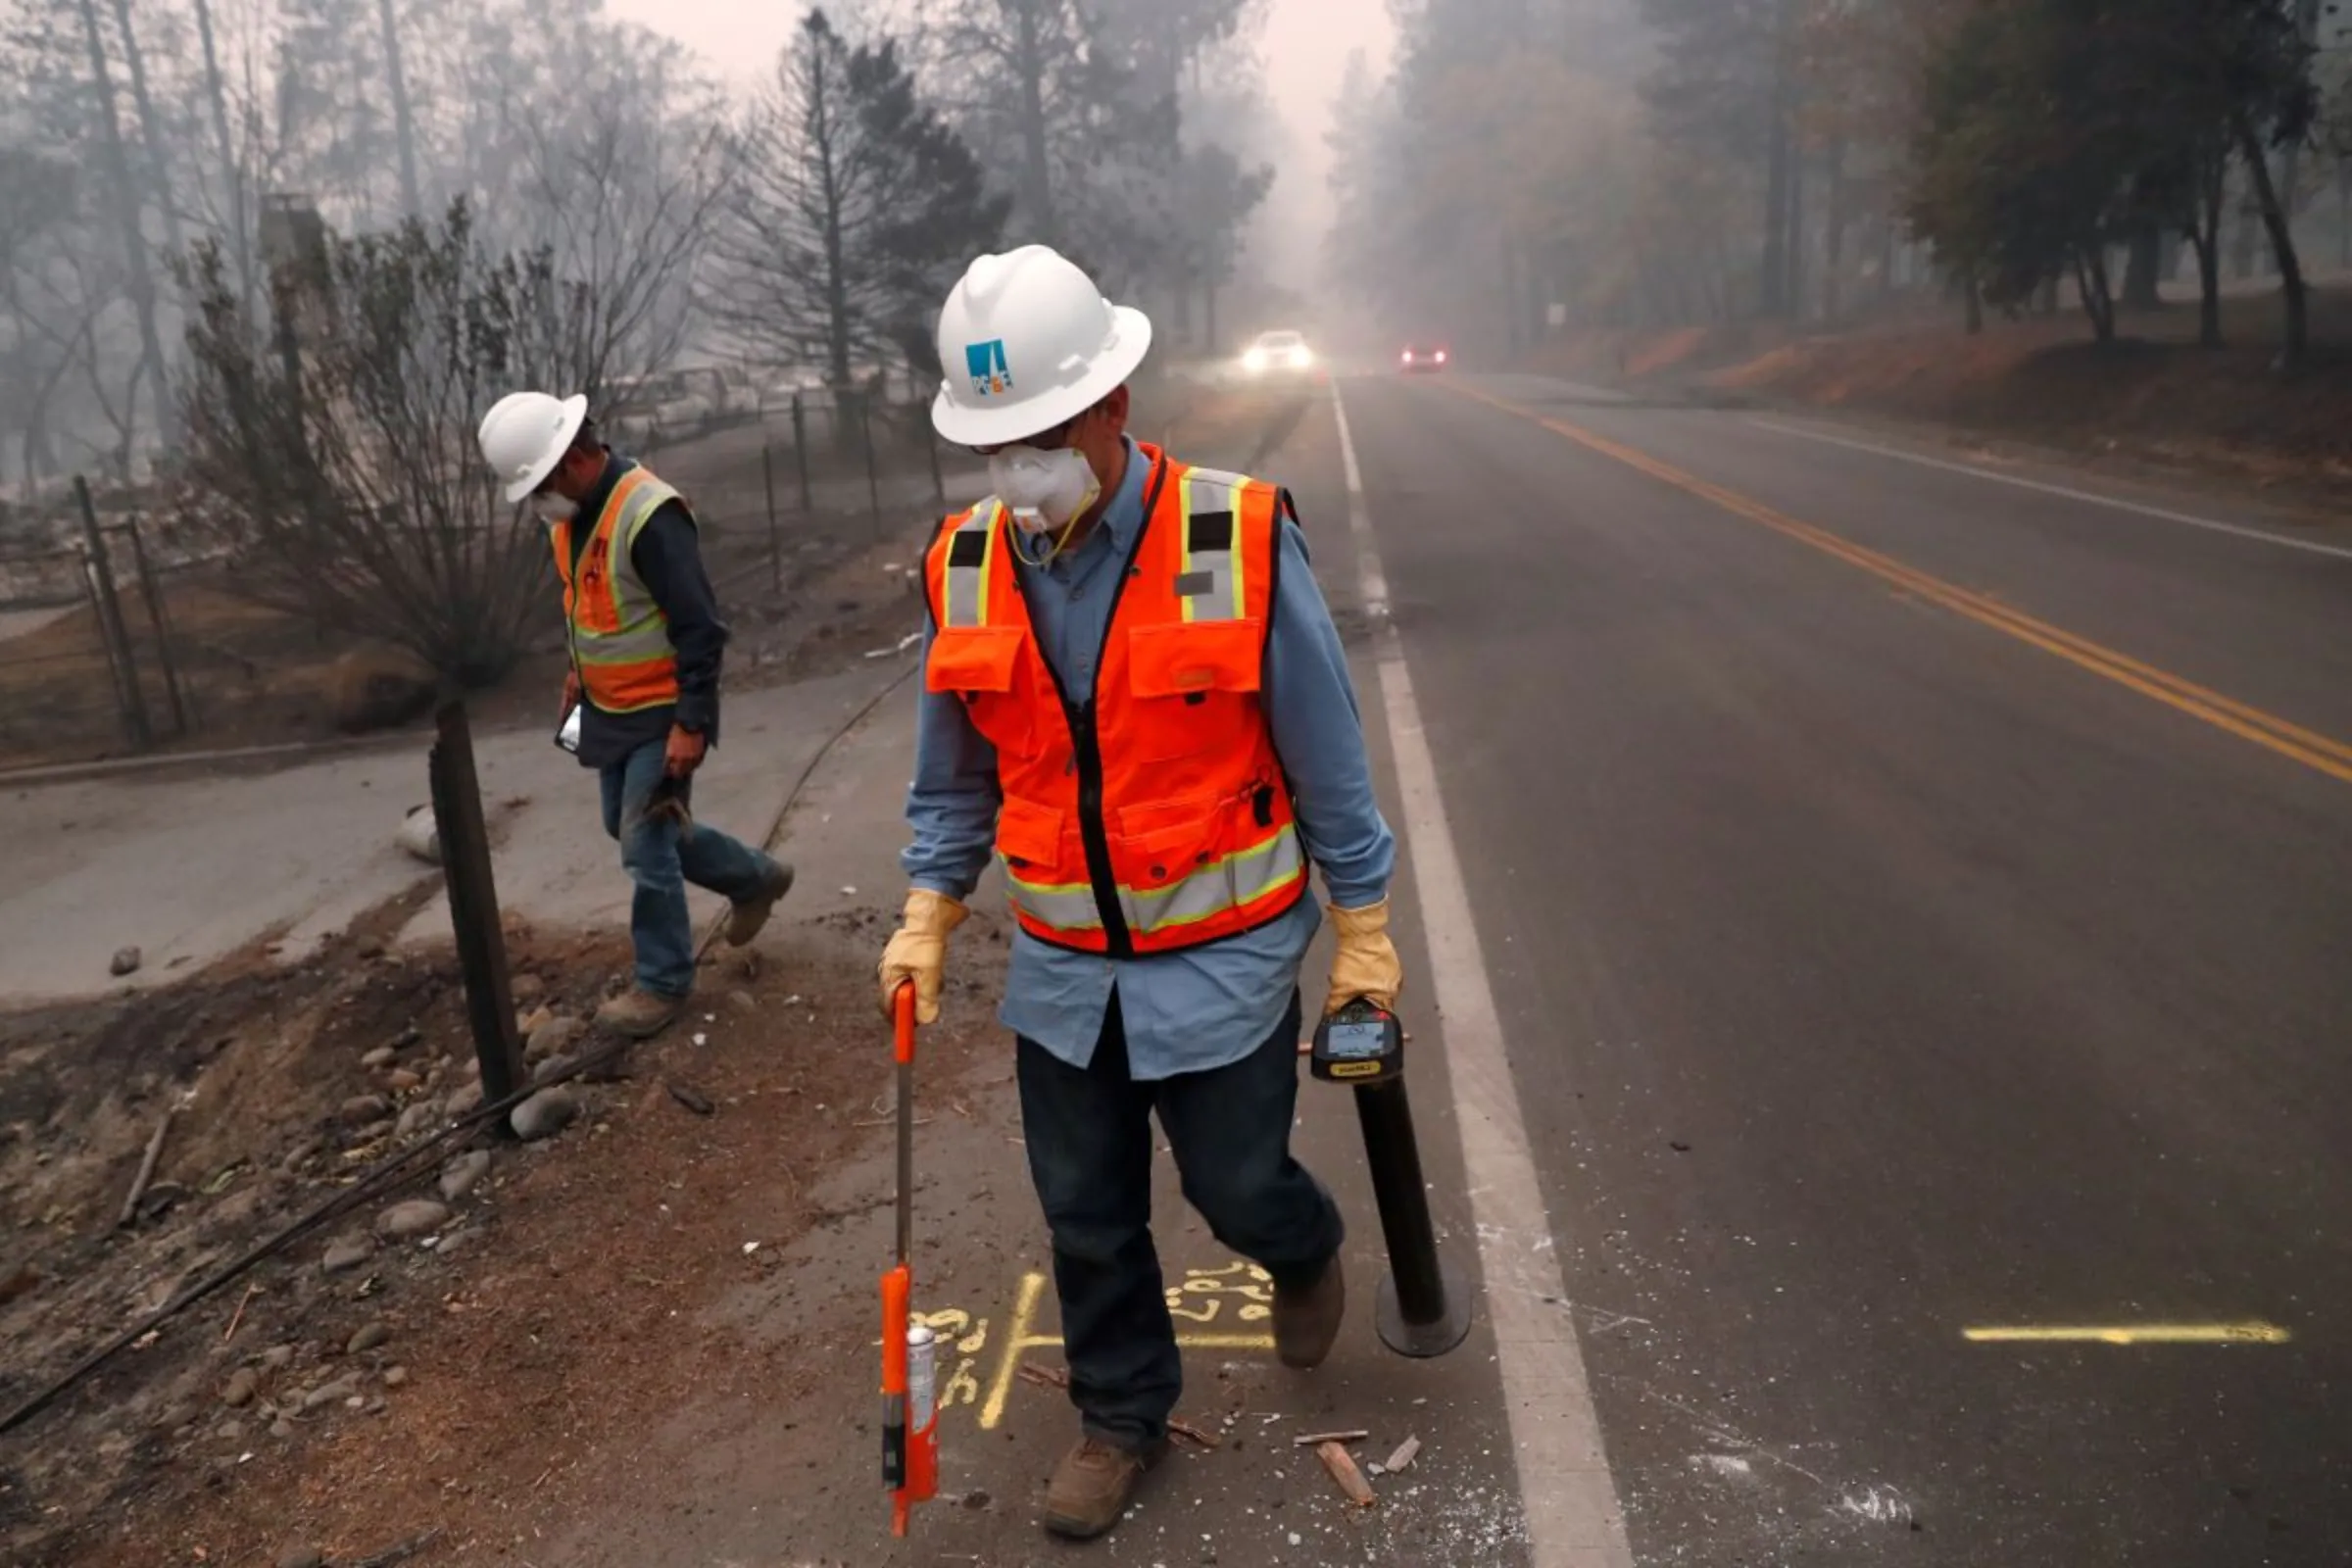 Employees of Pacific Gas & Electric (PG&E) mark gas lines in the aftermath of the Camp Fire in Paradise, California, U.S., November 14, 2018